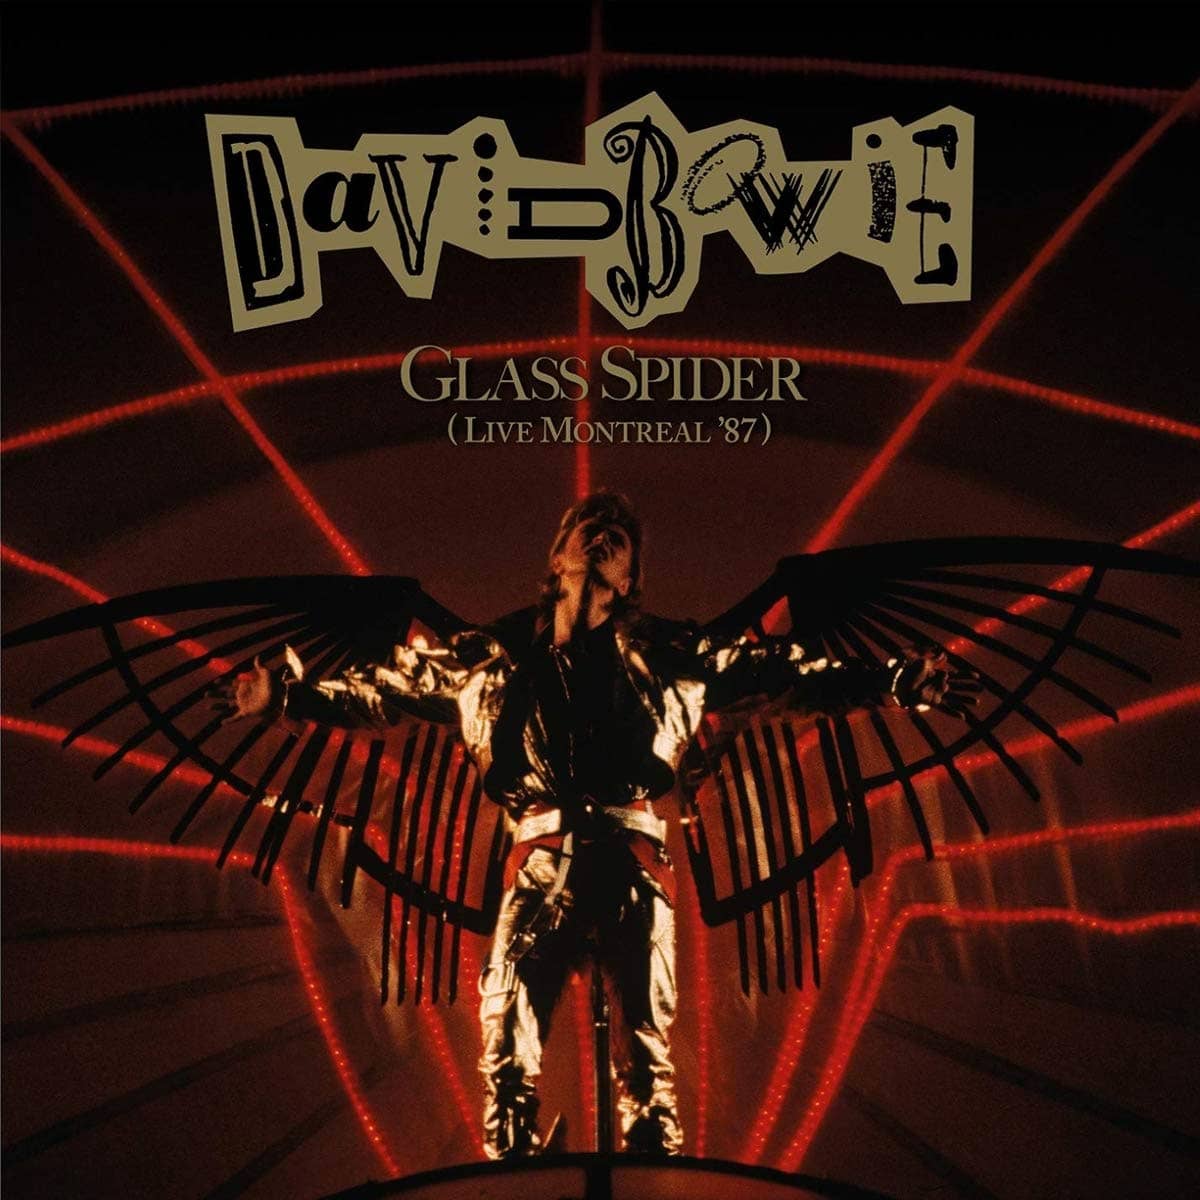 Glass Spider (Live Montreal ’87) album cover artwork | The Bowie Bible